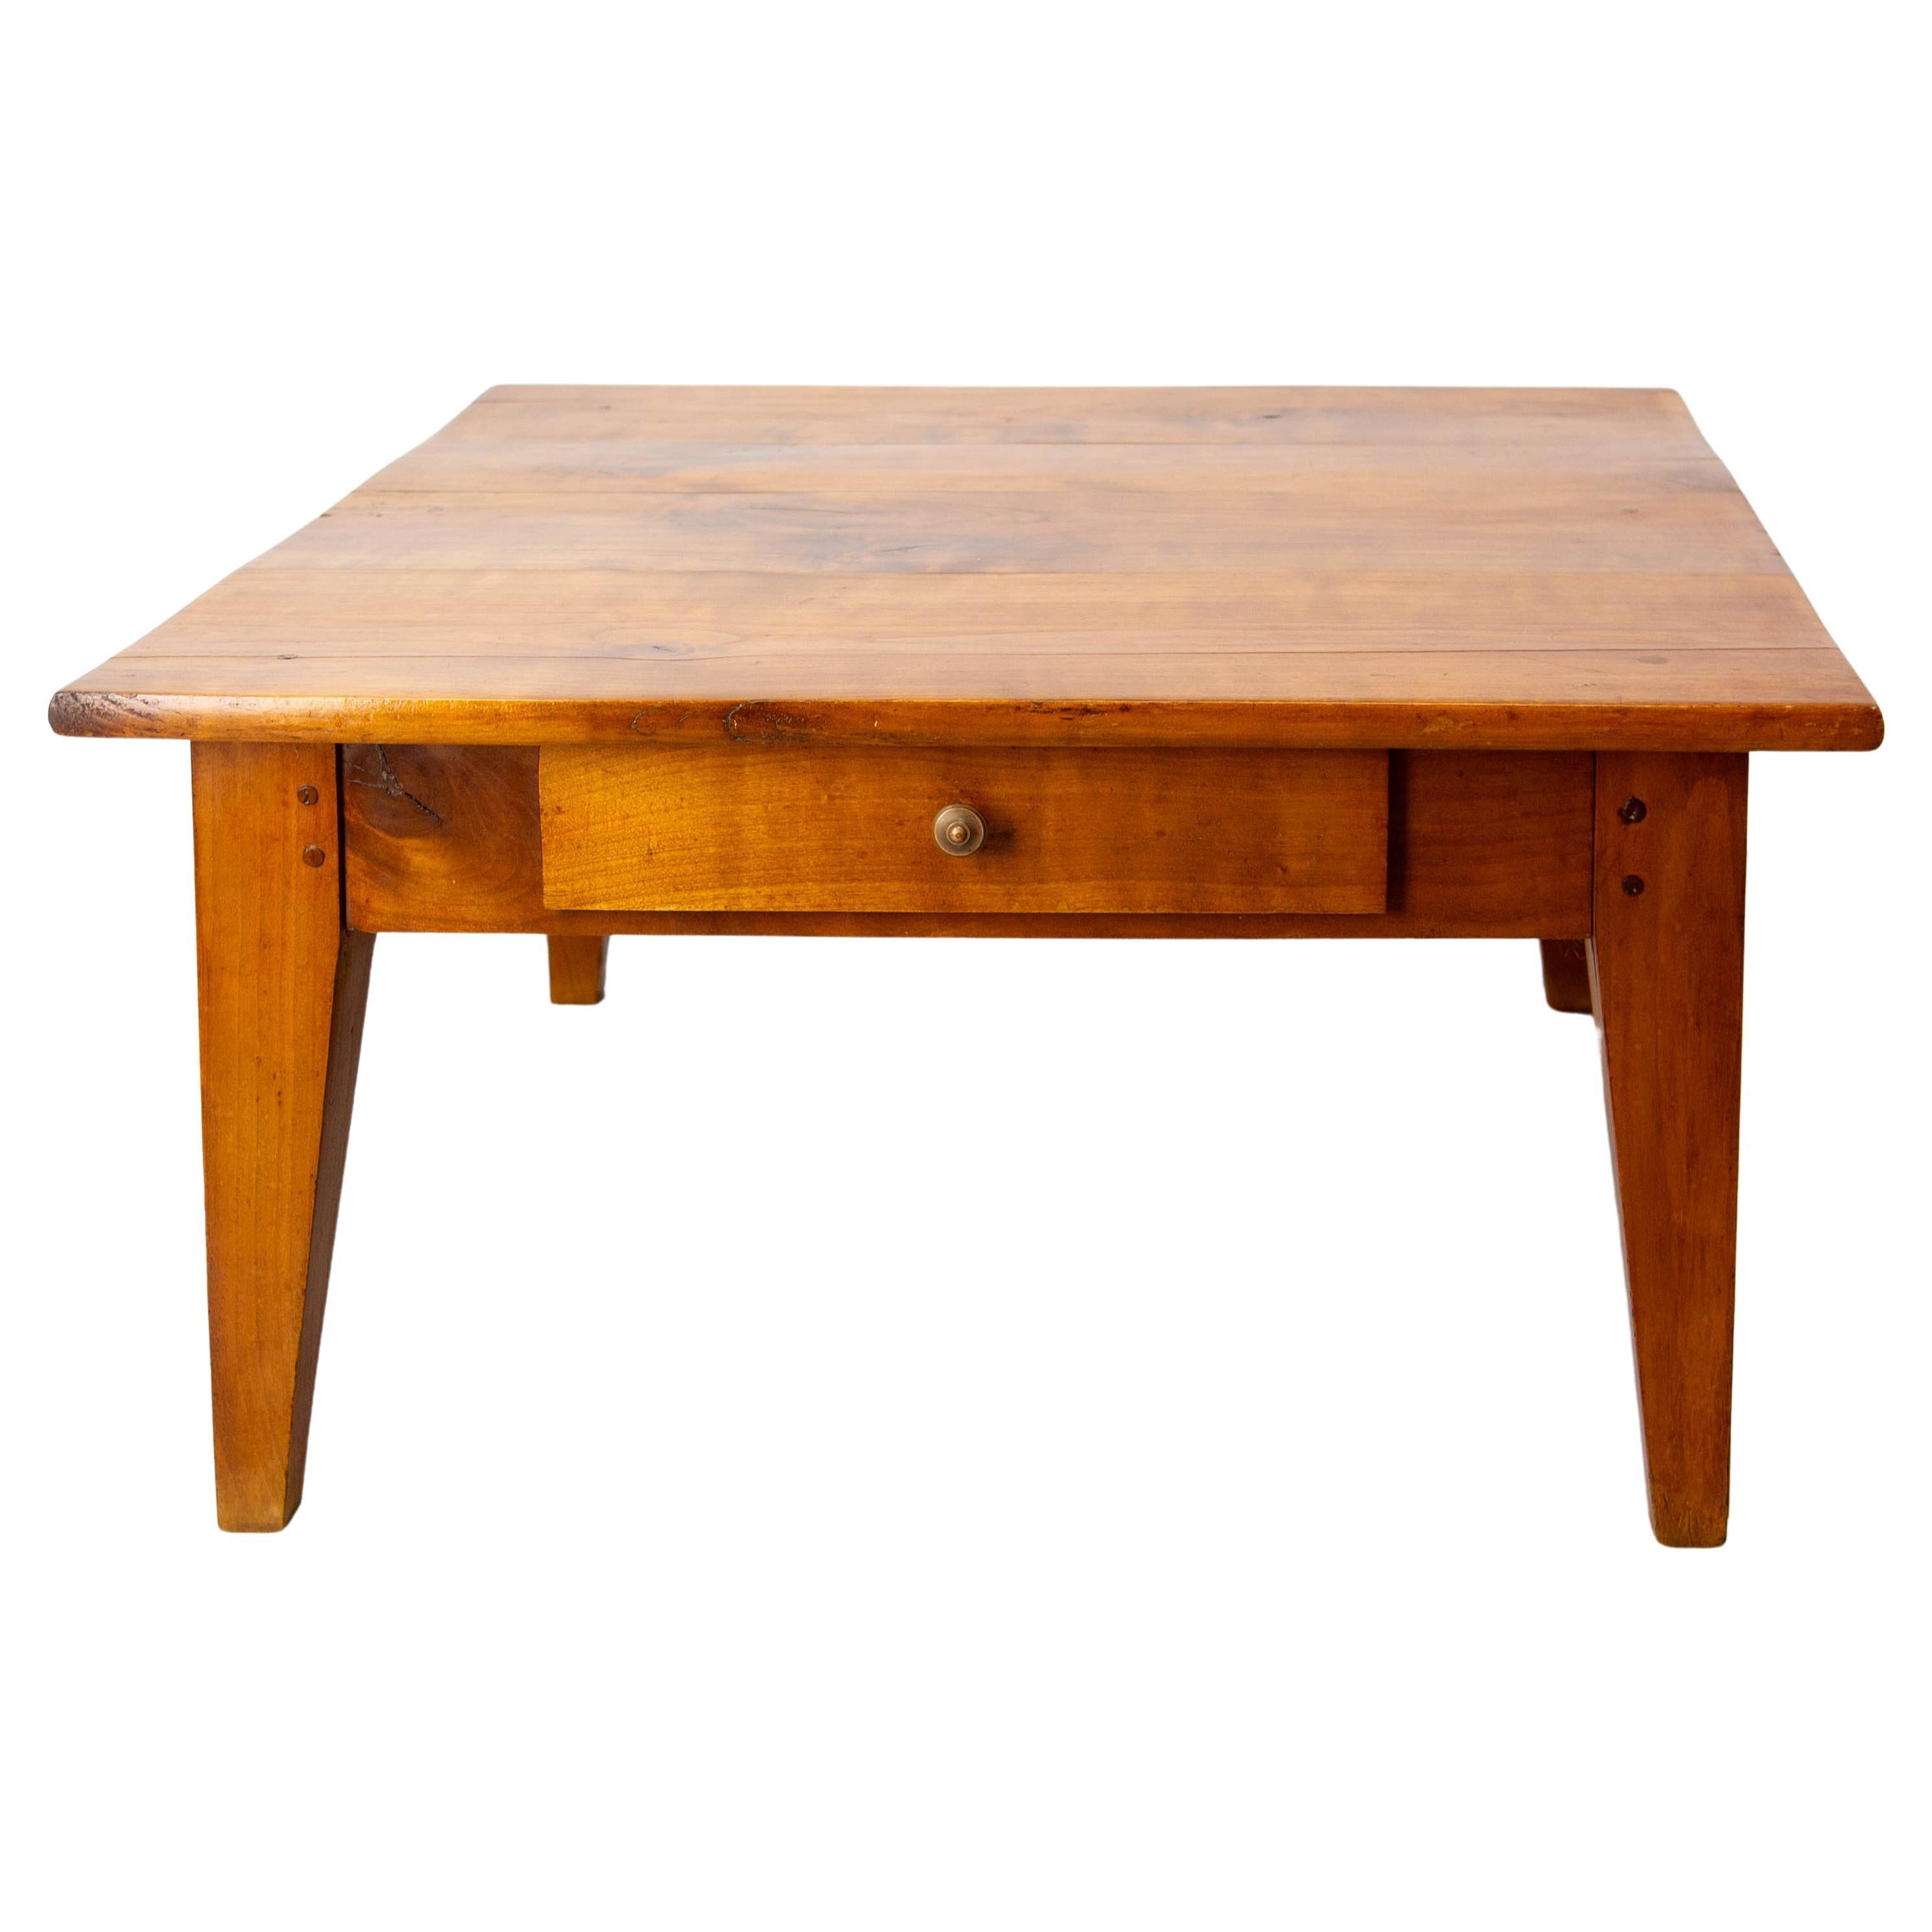 French coffee table made in the 20th mid-century period.
In a provincial style, this coffe table is simple and functional with iits two drawers.
The cherry wood is well highlighted on the top of the table
Good vintage condition.

Shipping:
78 / 80 /